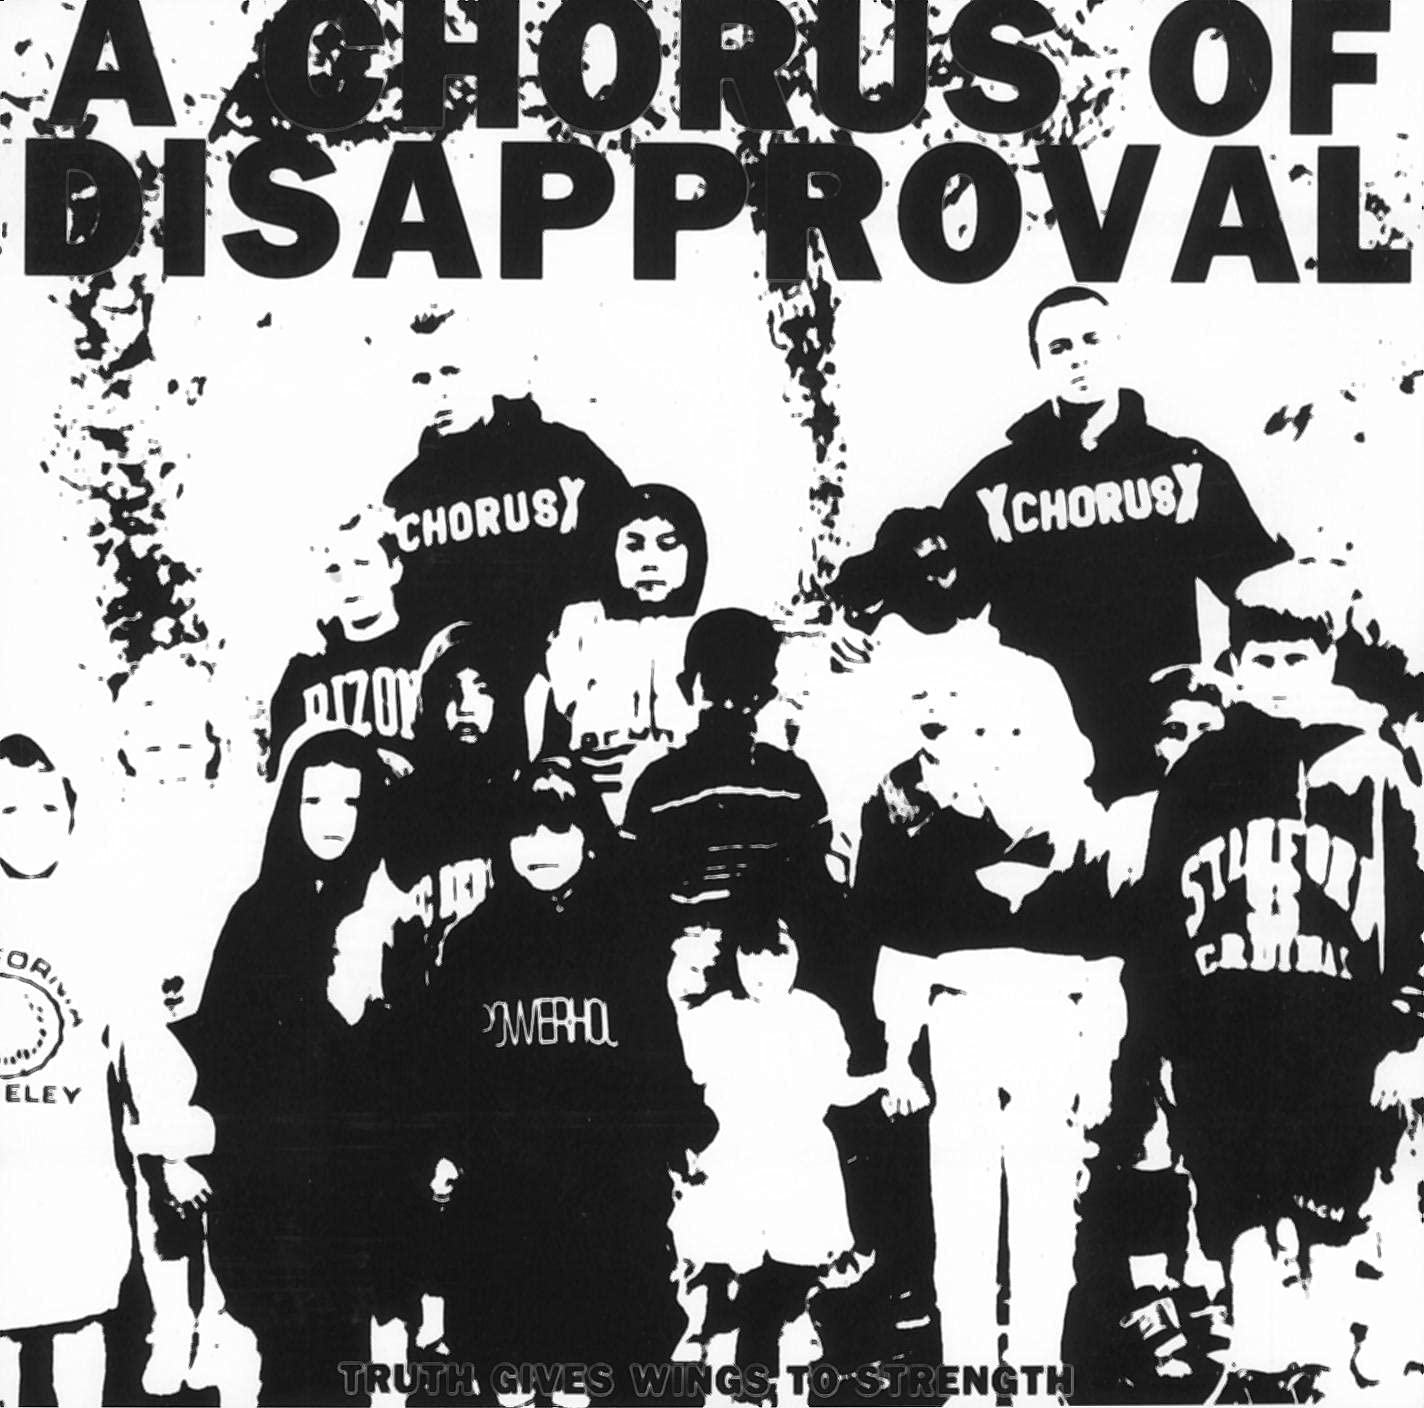 A Chorus Of Disapproval - Truth Gives Wings To Strength 12" LP